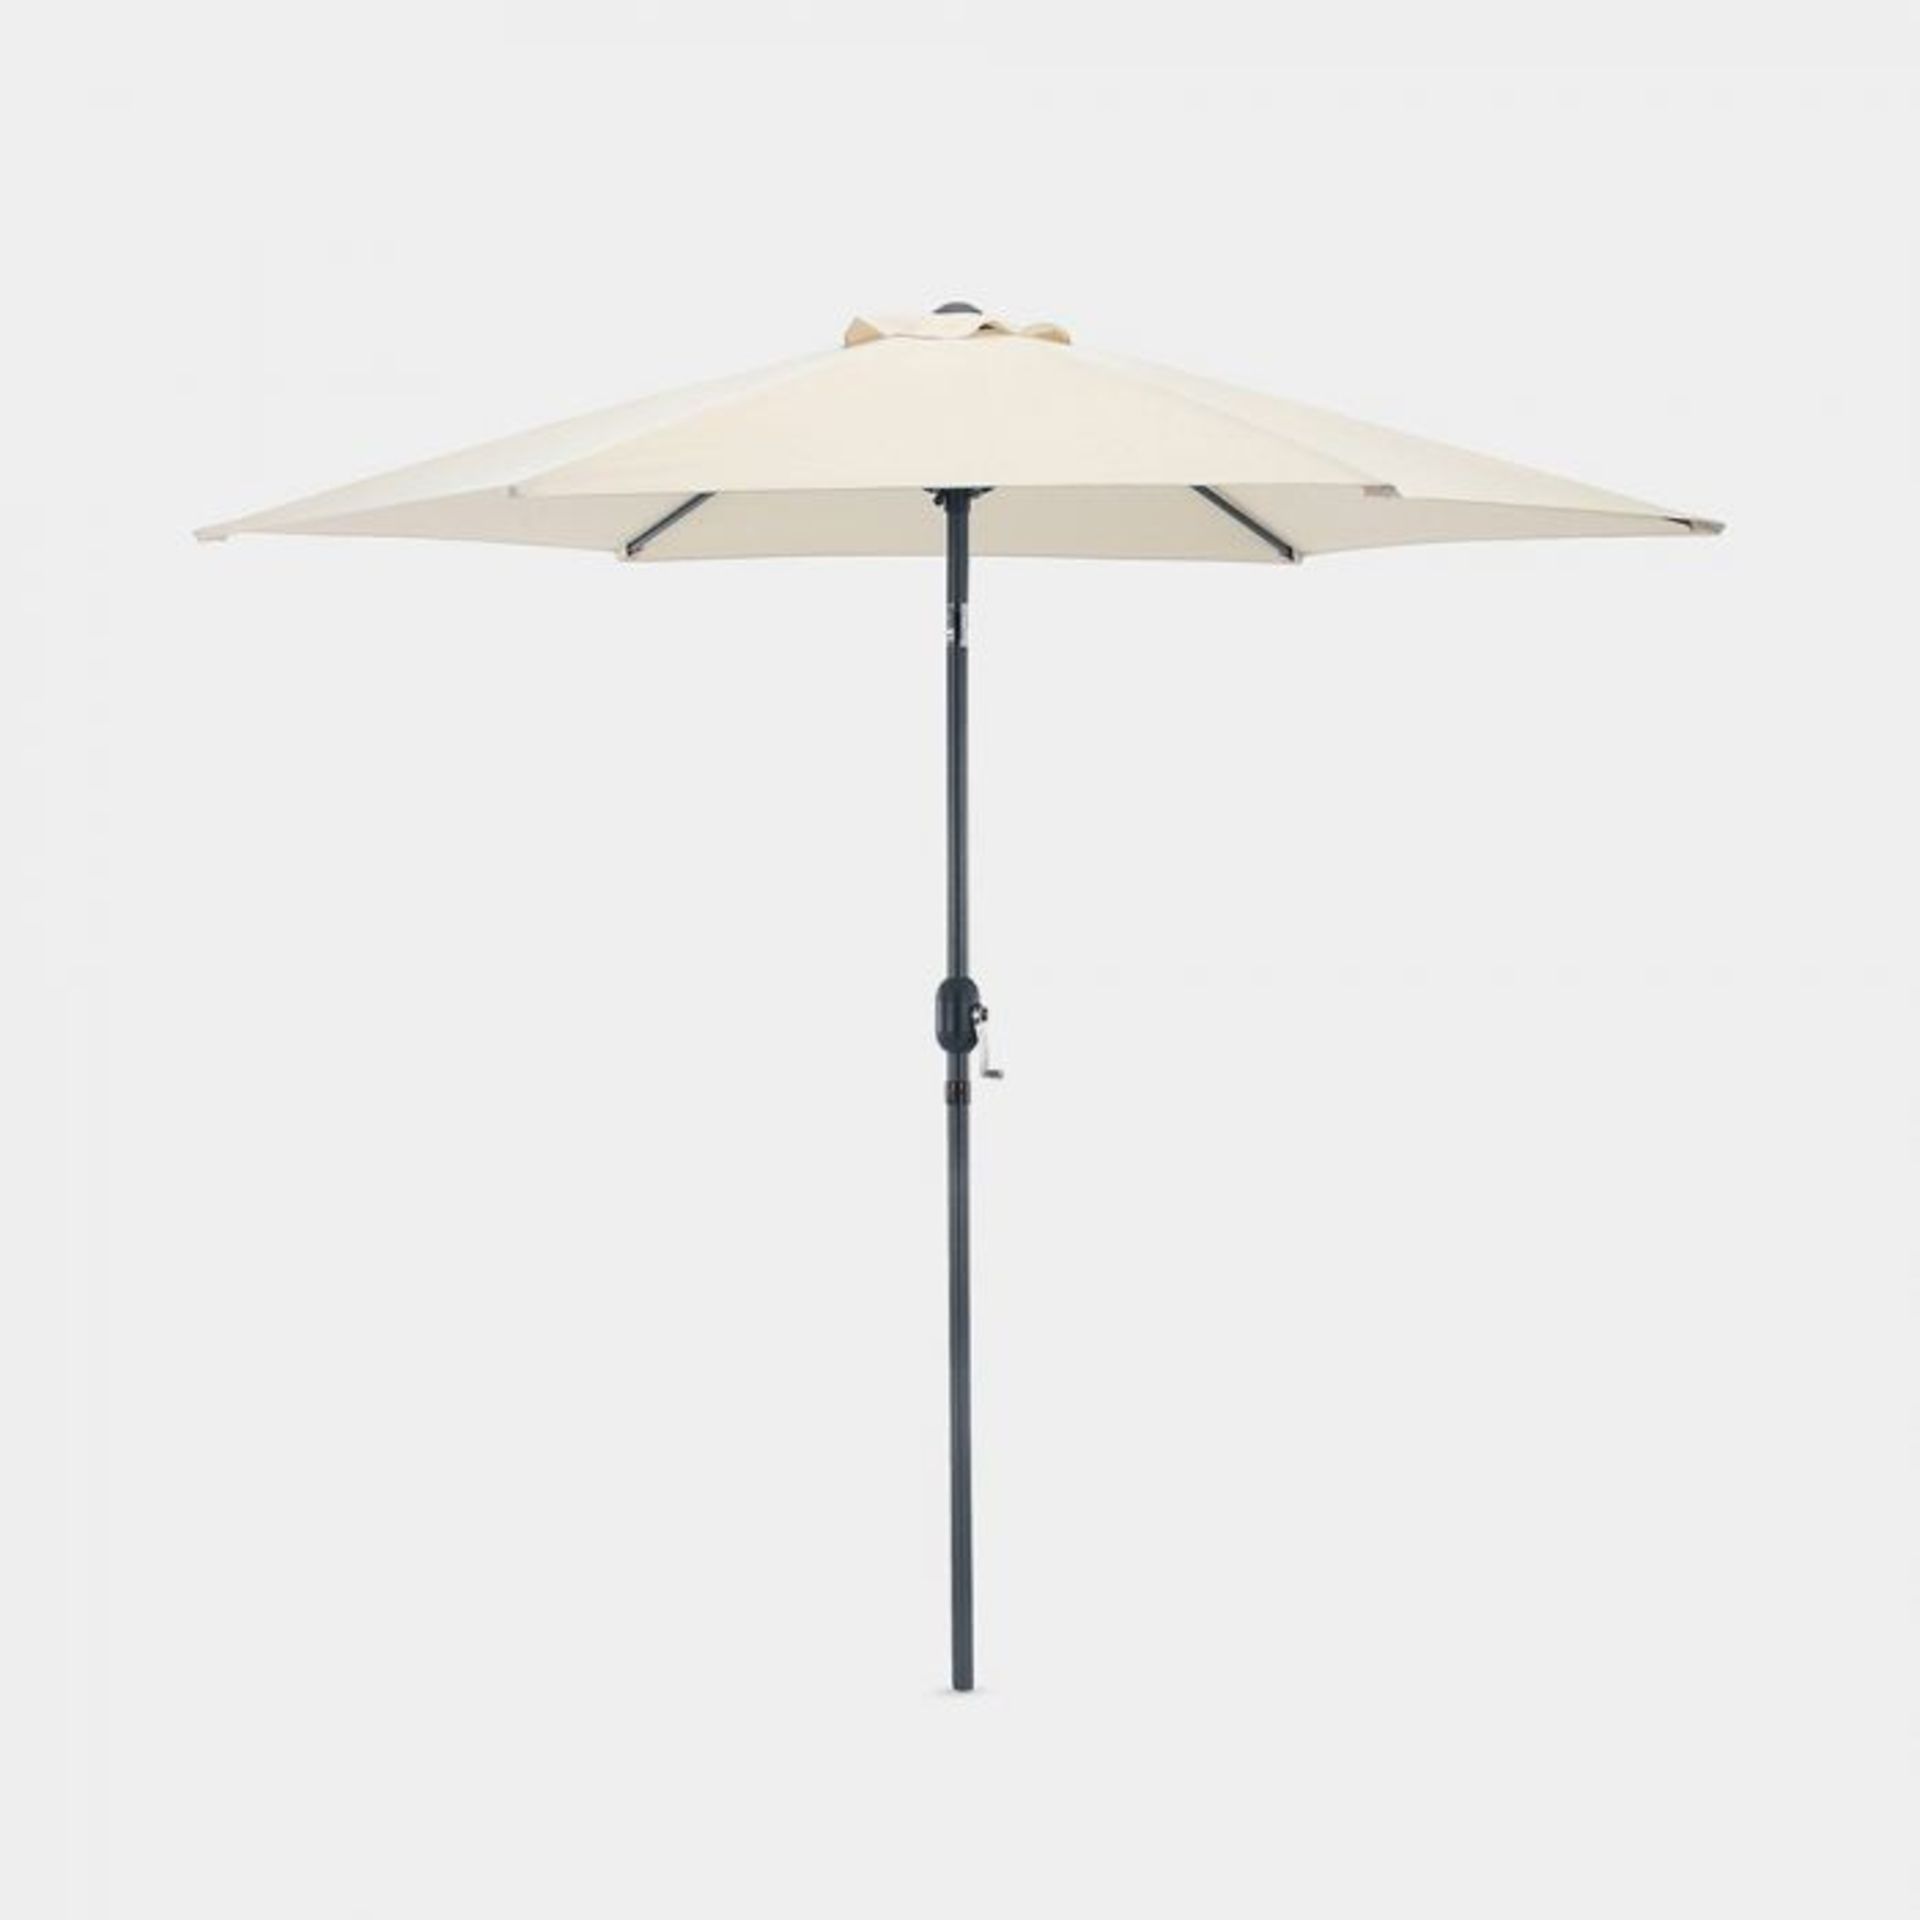 Ivory Cream 2.7m Steel Garden Parasol. What better way to celebrate the arrival of the sun than by